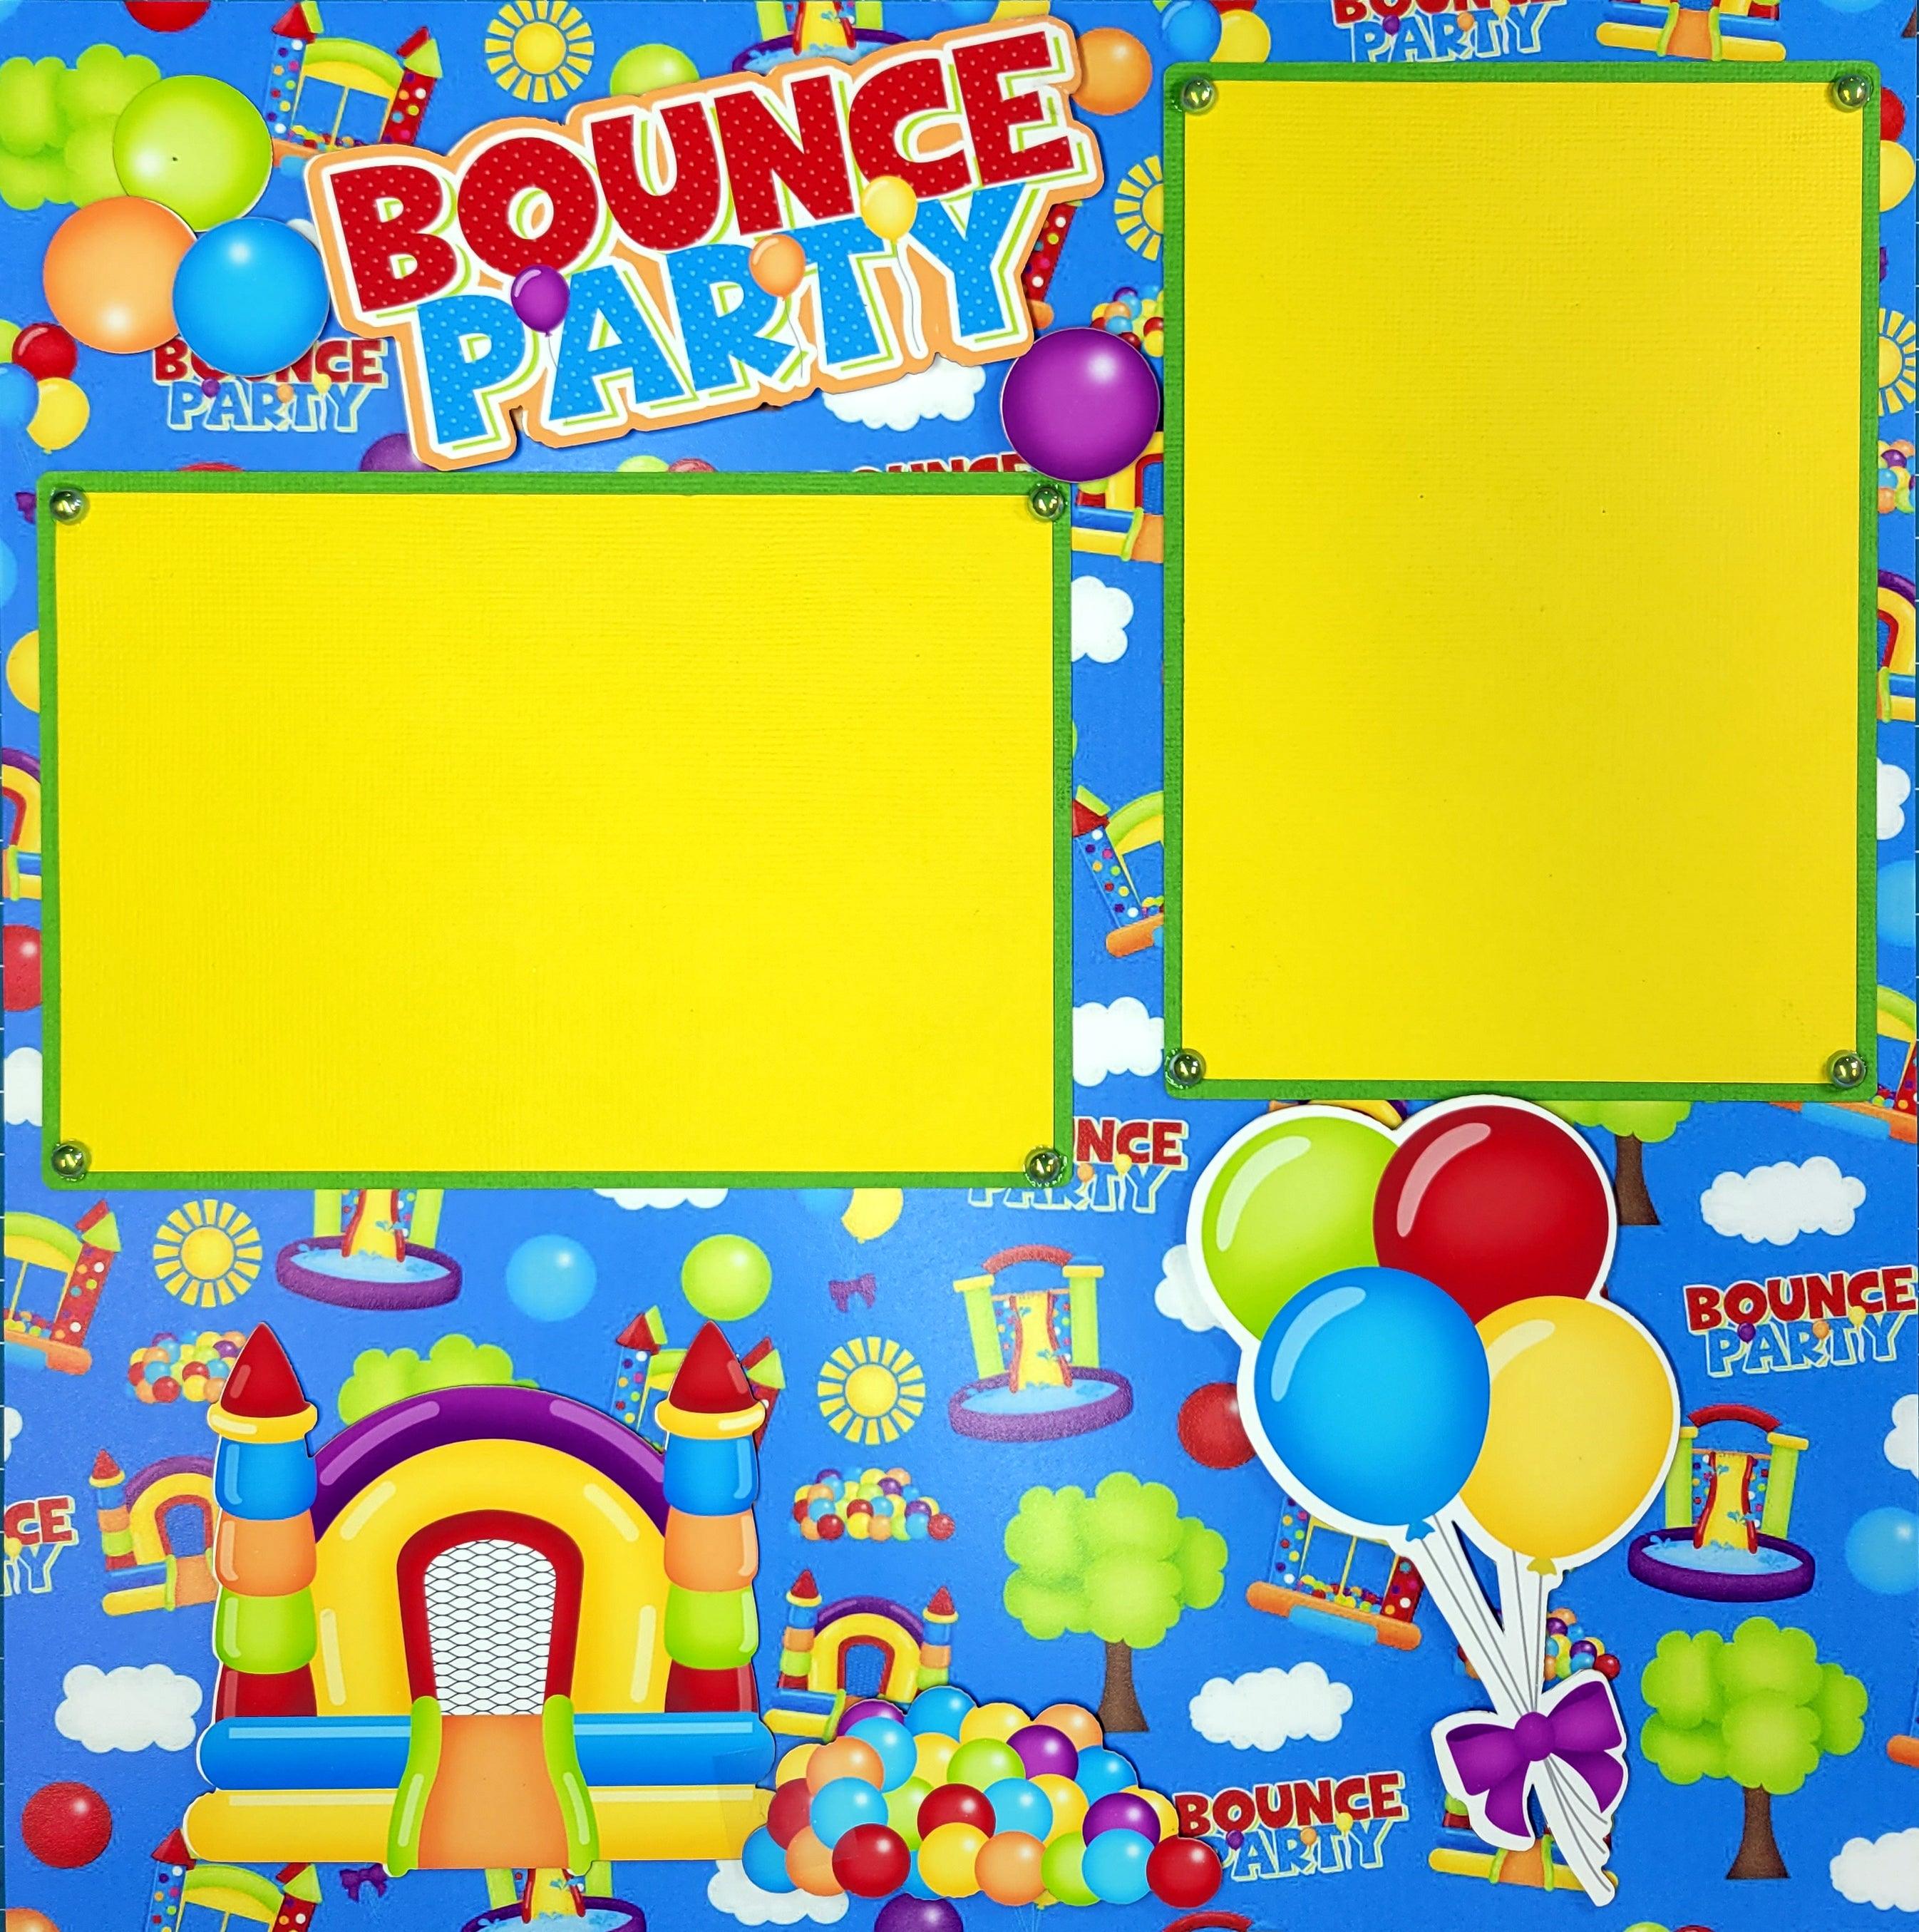 Bounce House Party Premade, Hand- Embellished 2 - 12 x 12 Scrapbook Page Premade by SSC Designs - Scrapbook Supply Companies